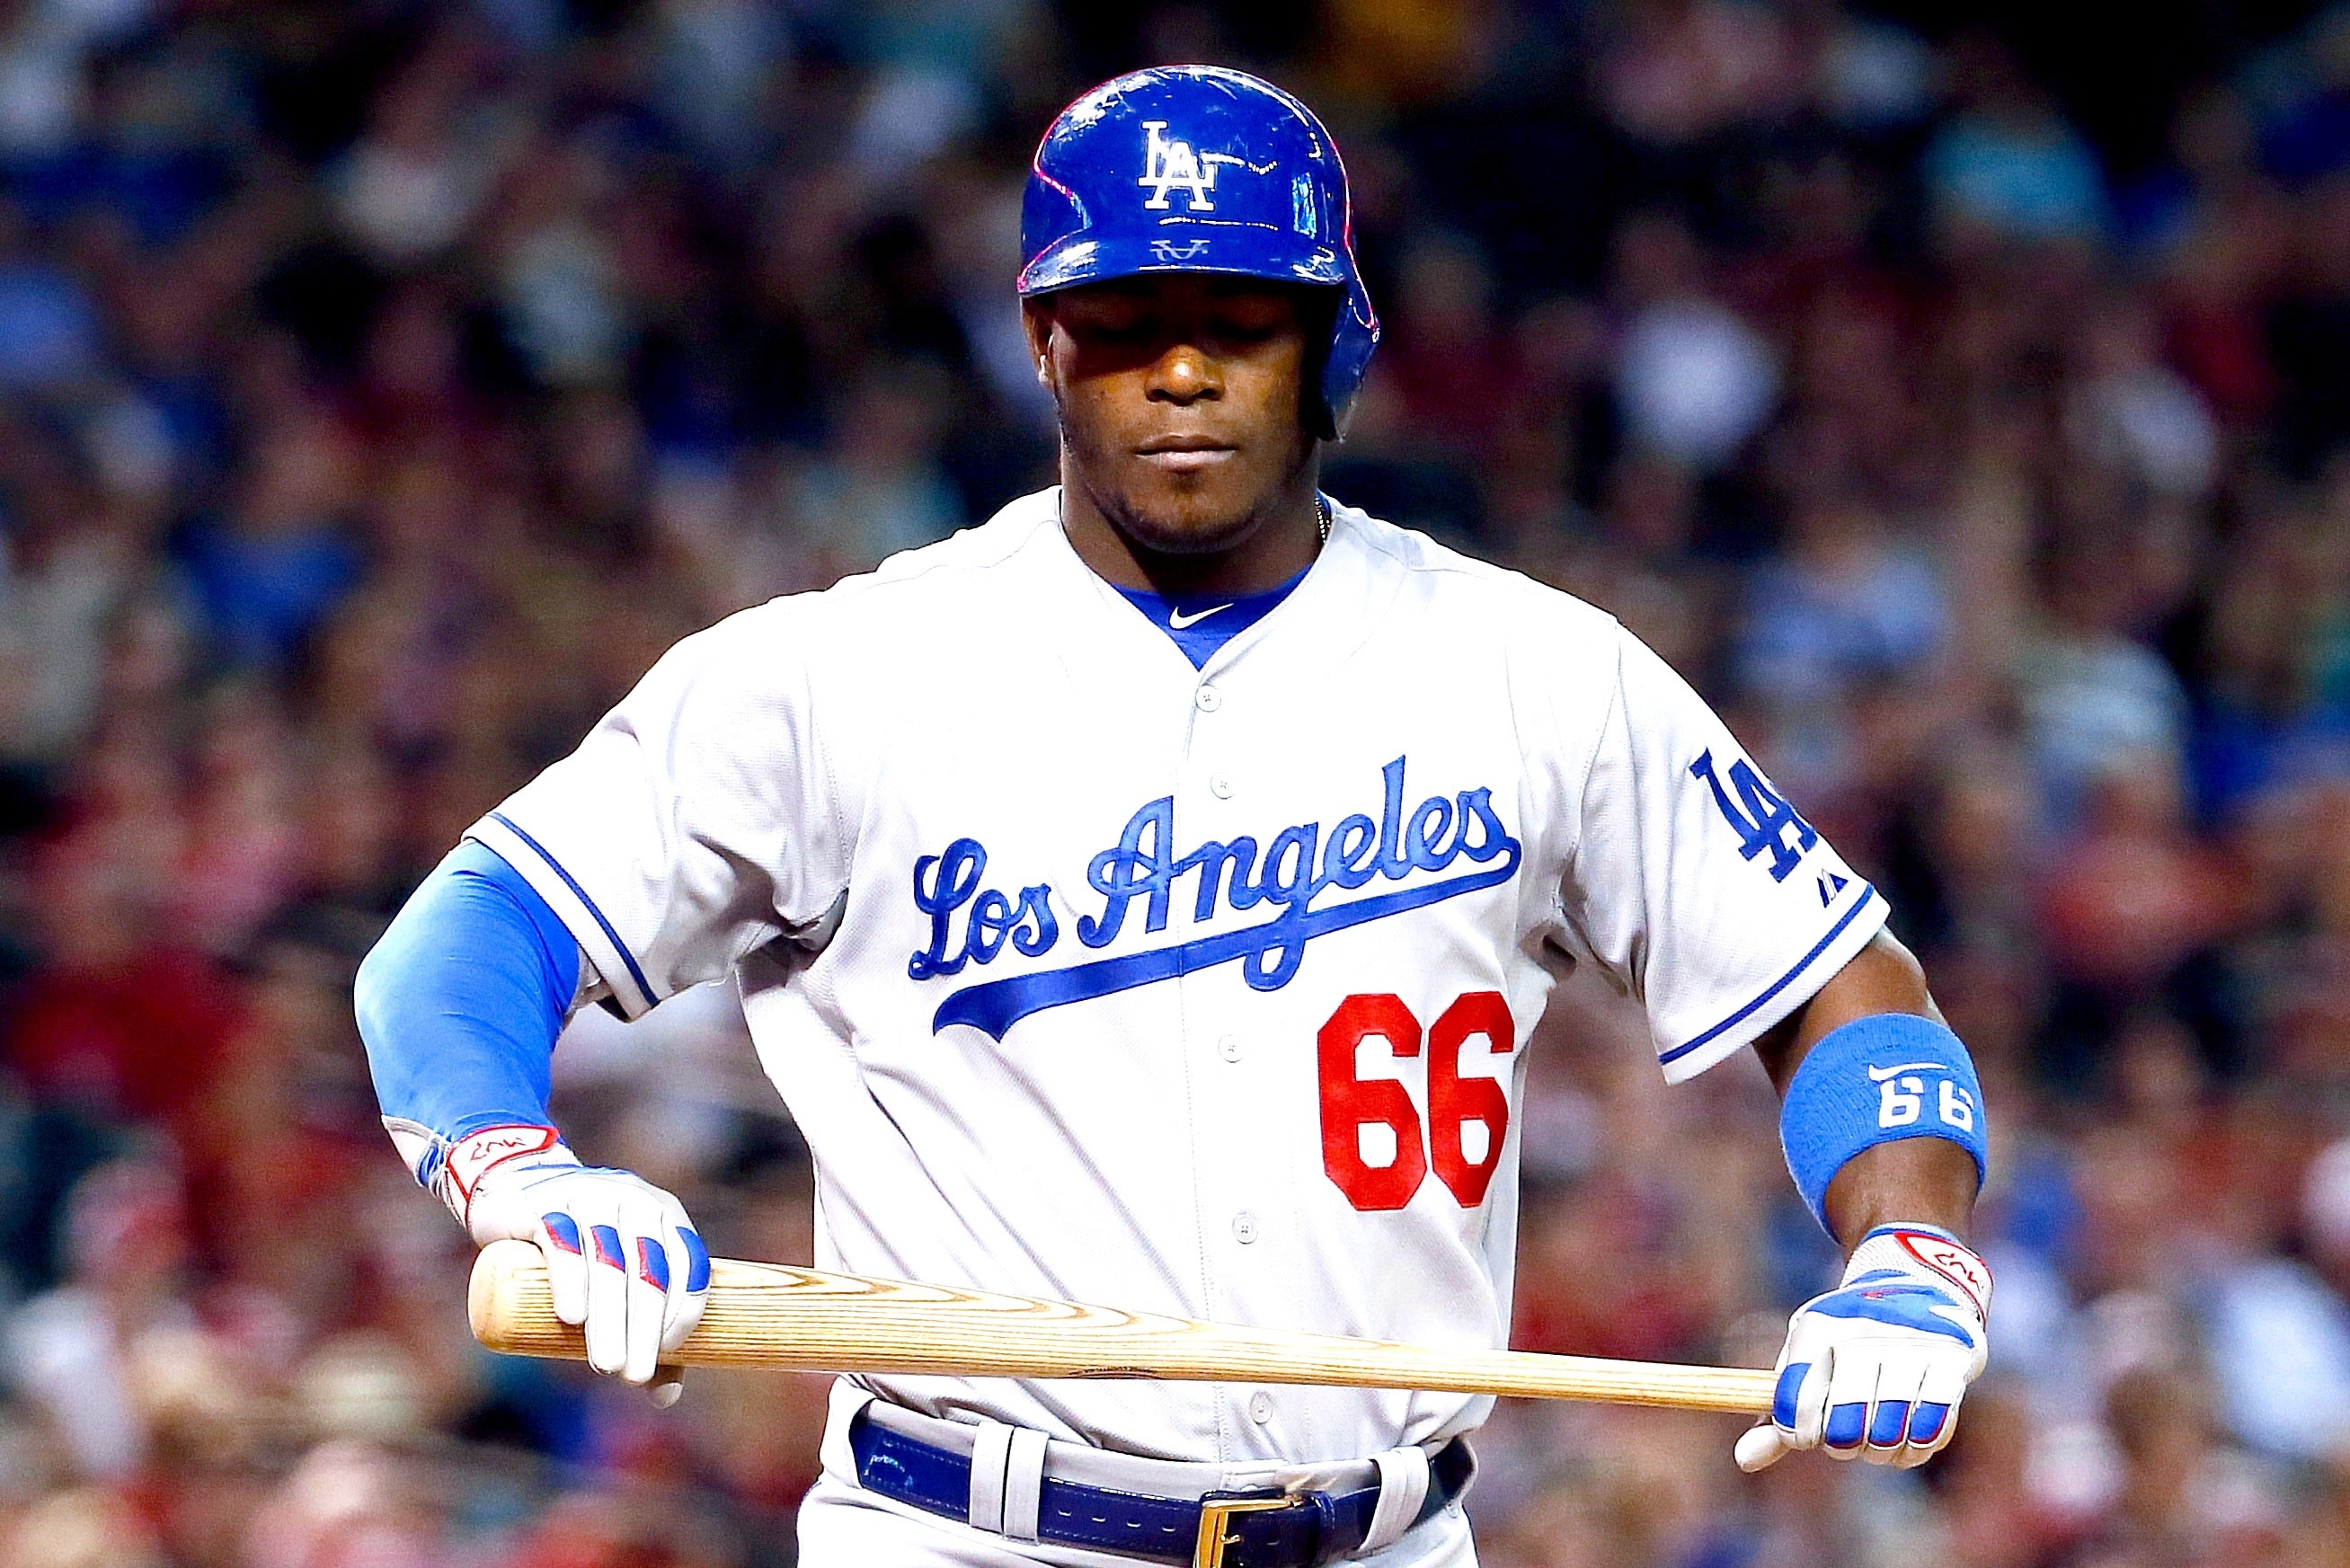 Yasiel Puig is embracing the Reds and leaving the Dodgers behind